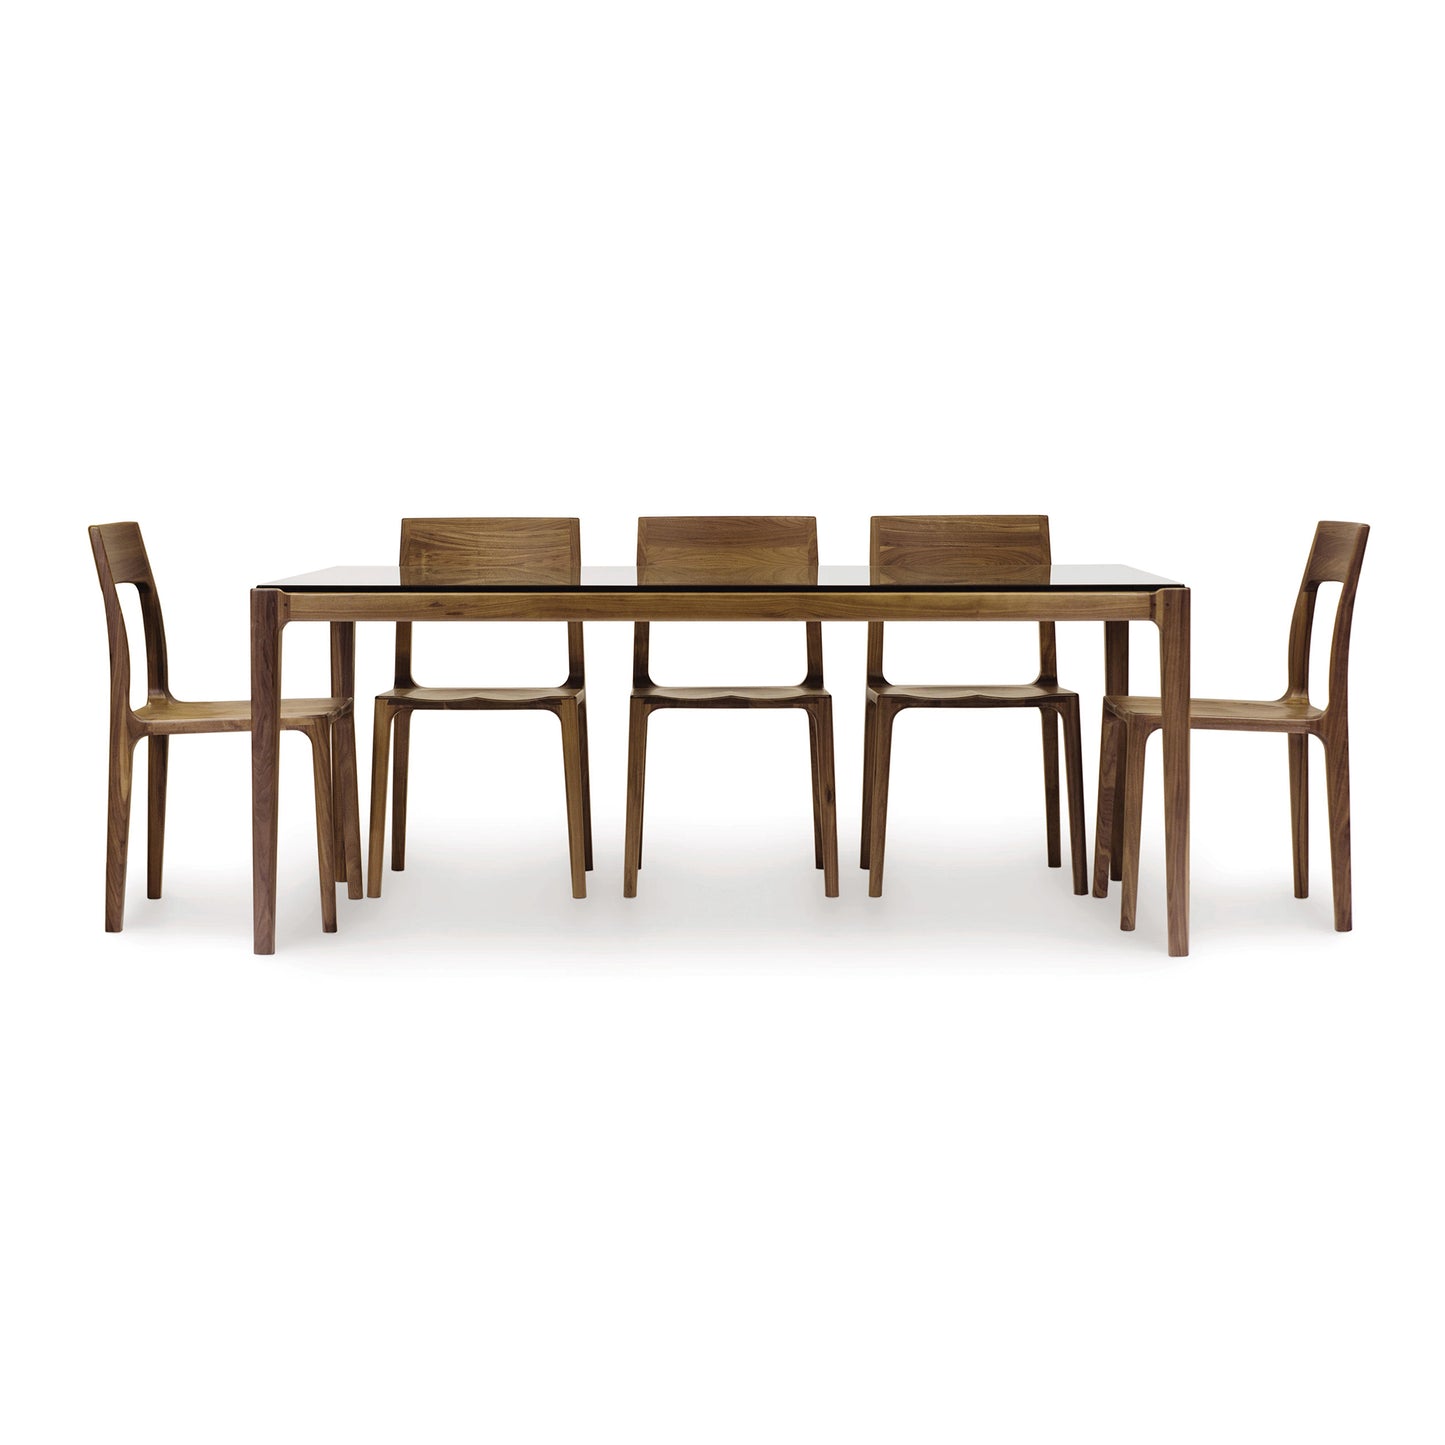 A minimalist design Lisse Glass Top Dining Table with six chairs and a glass top, crafted with natural walnut, made by Copeland Furniture.